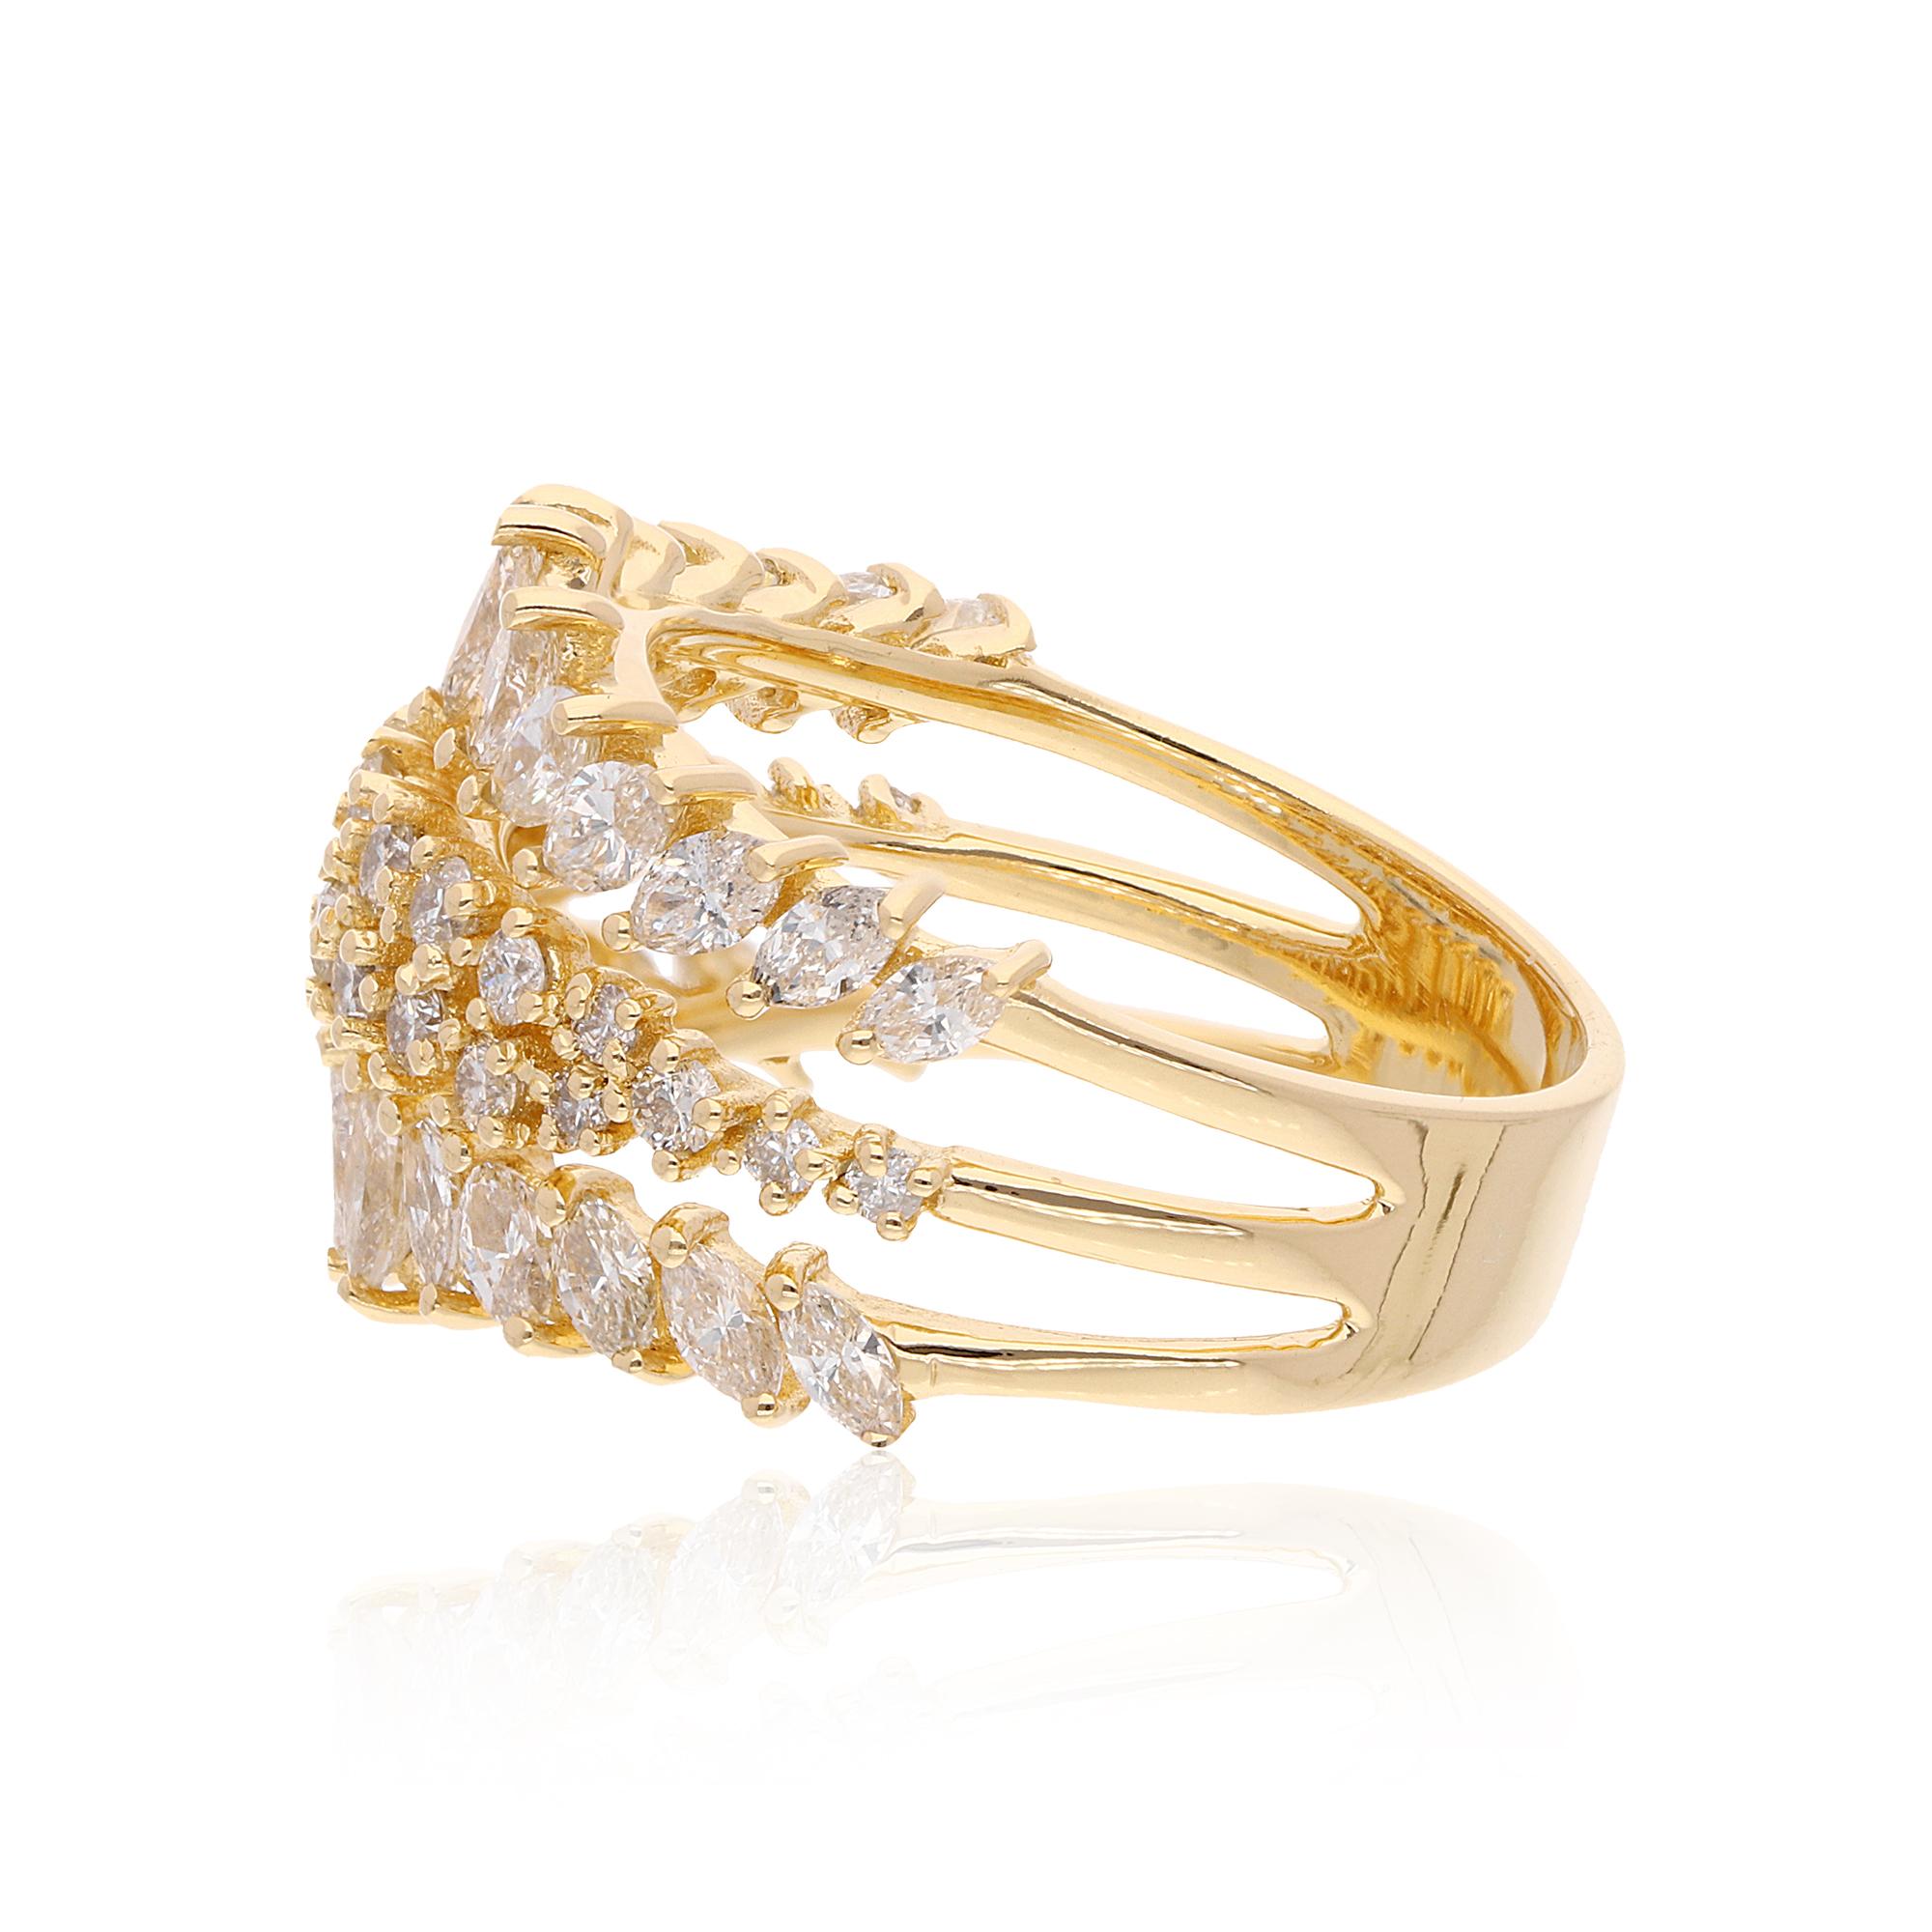 Item Code :- CN-16878
Gross Wt. :- 7.00 gm
18k Yellow Gold Wt. :- 6.60 gm
Diamond Wt. :- 2.00 Ct. ( SI Clarity & HI Color )
Ring Size :- 7 US & All size available

✦ Sizing
.....................
We can adjust most items to fit your sizing